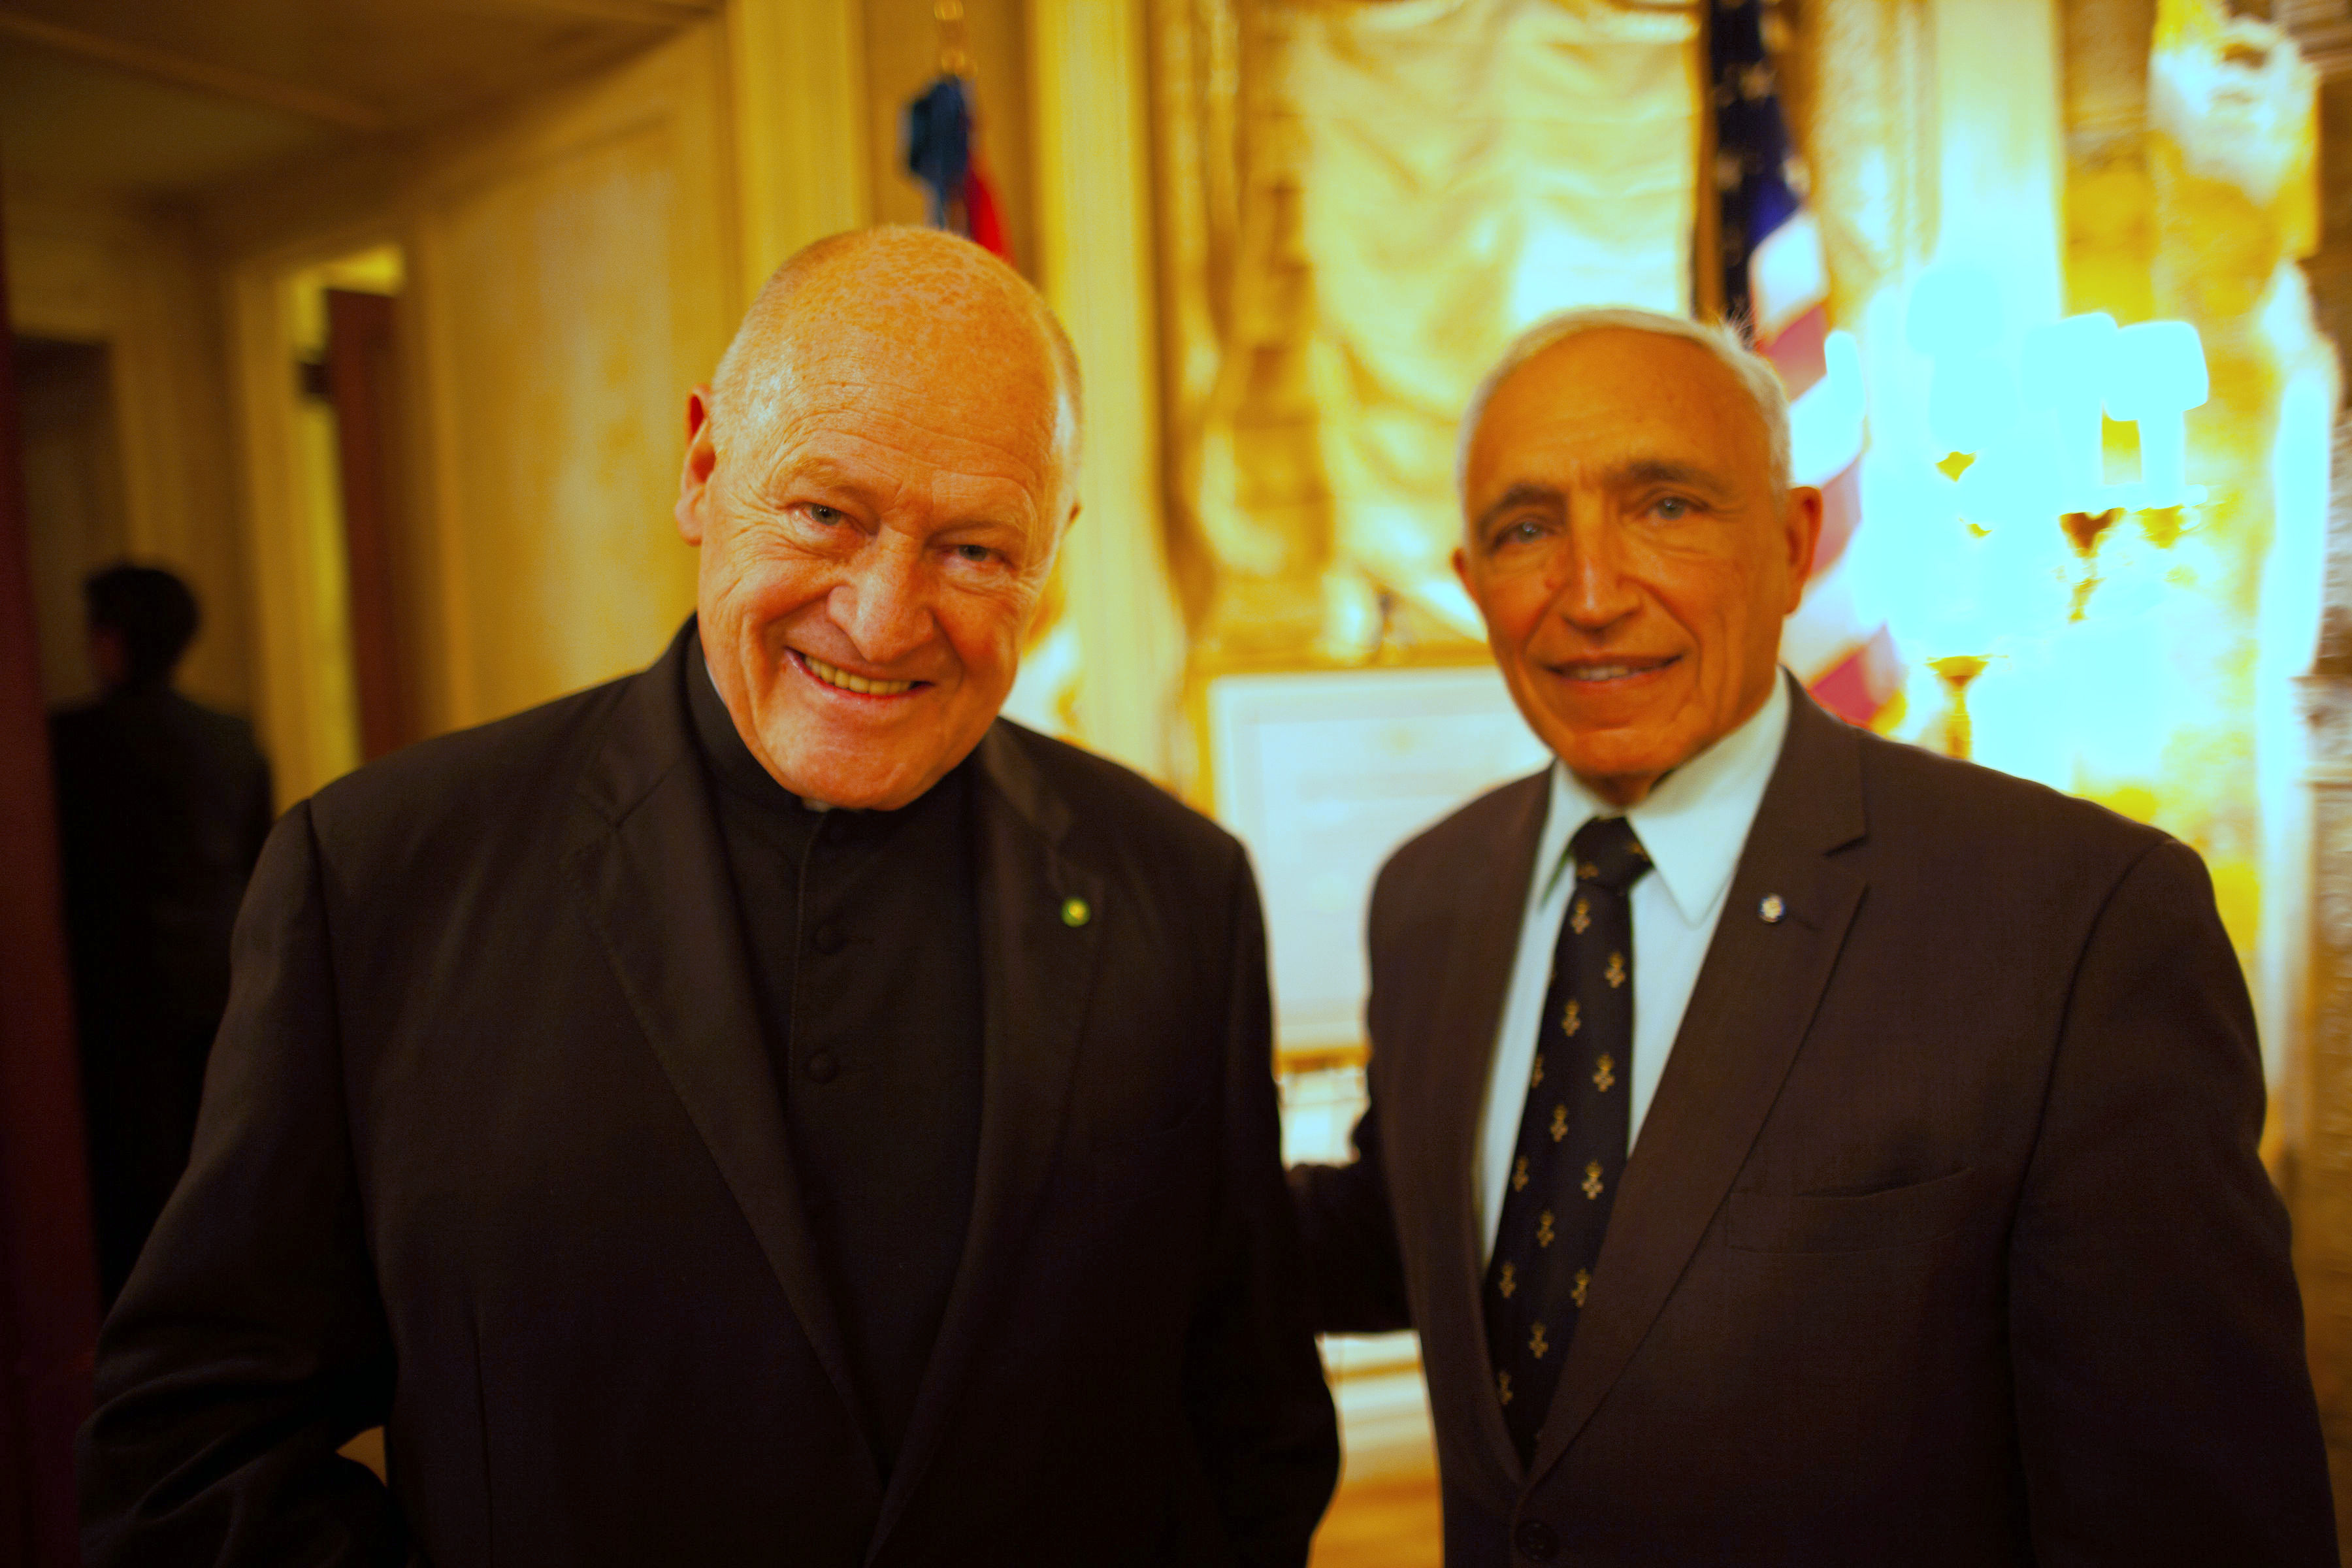 Msgr. Robert T. Richie, Rector of the Cathedral of Saint Patrick with Savoy Foundation President Joseph Sciame